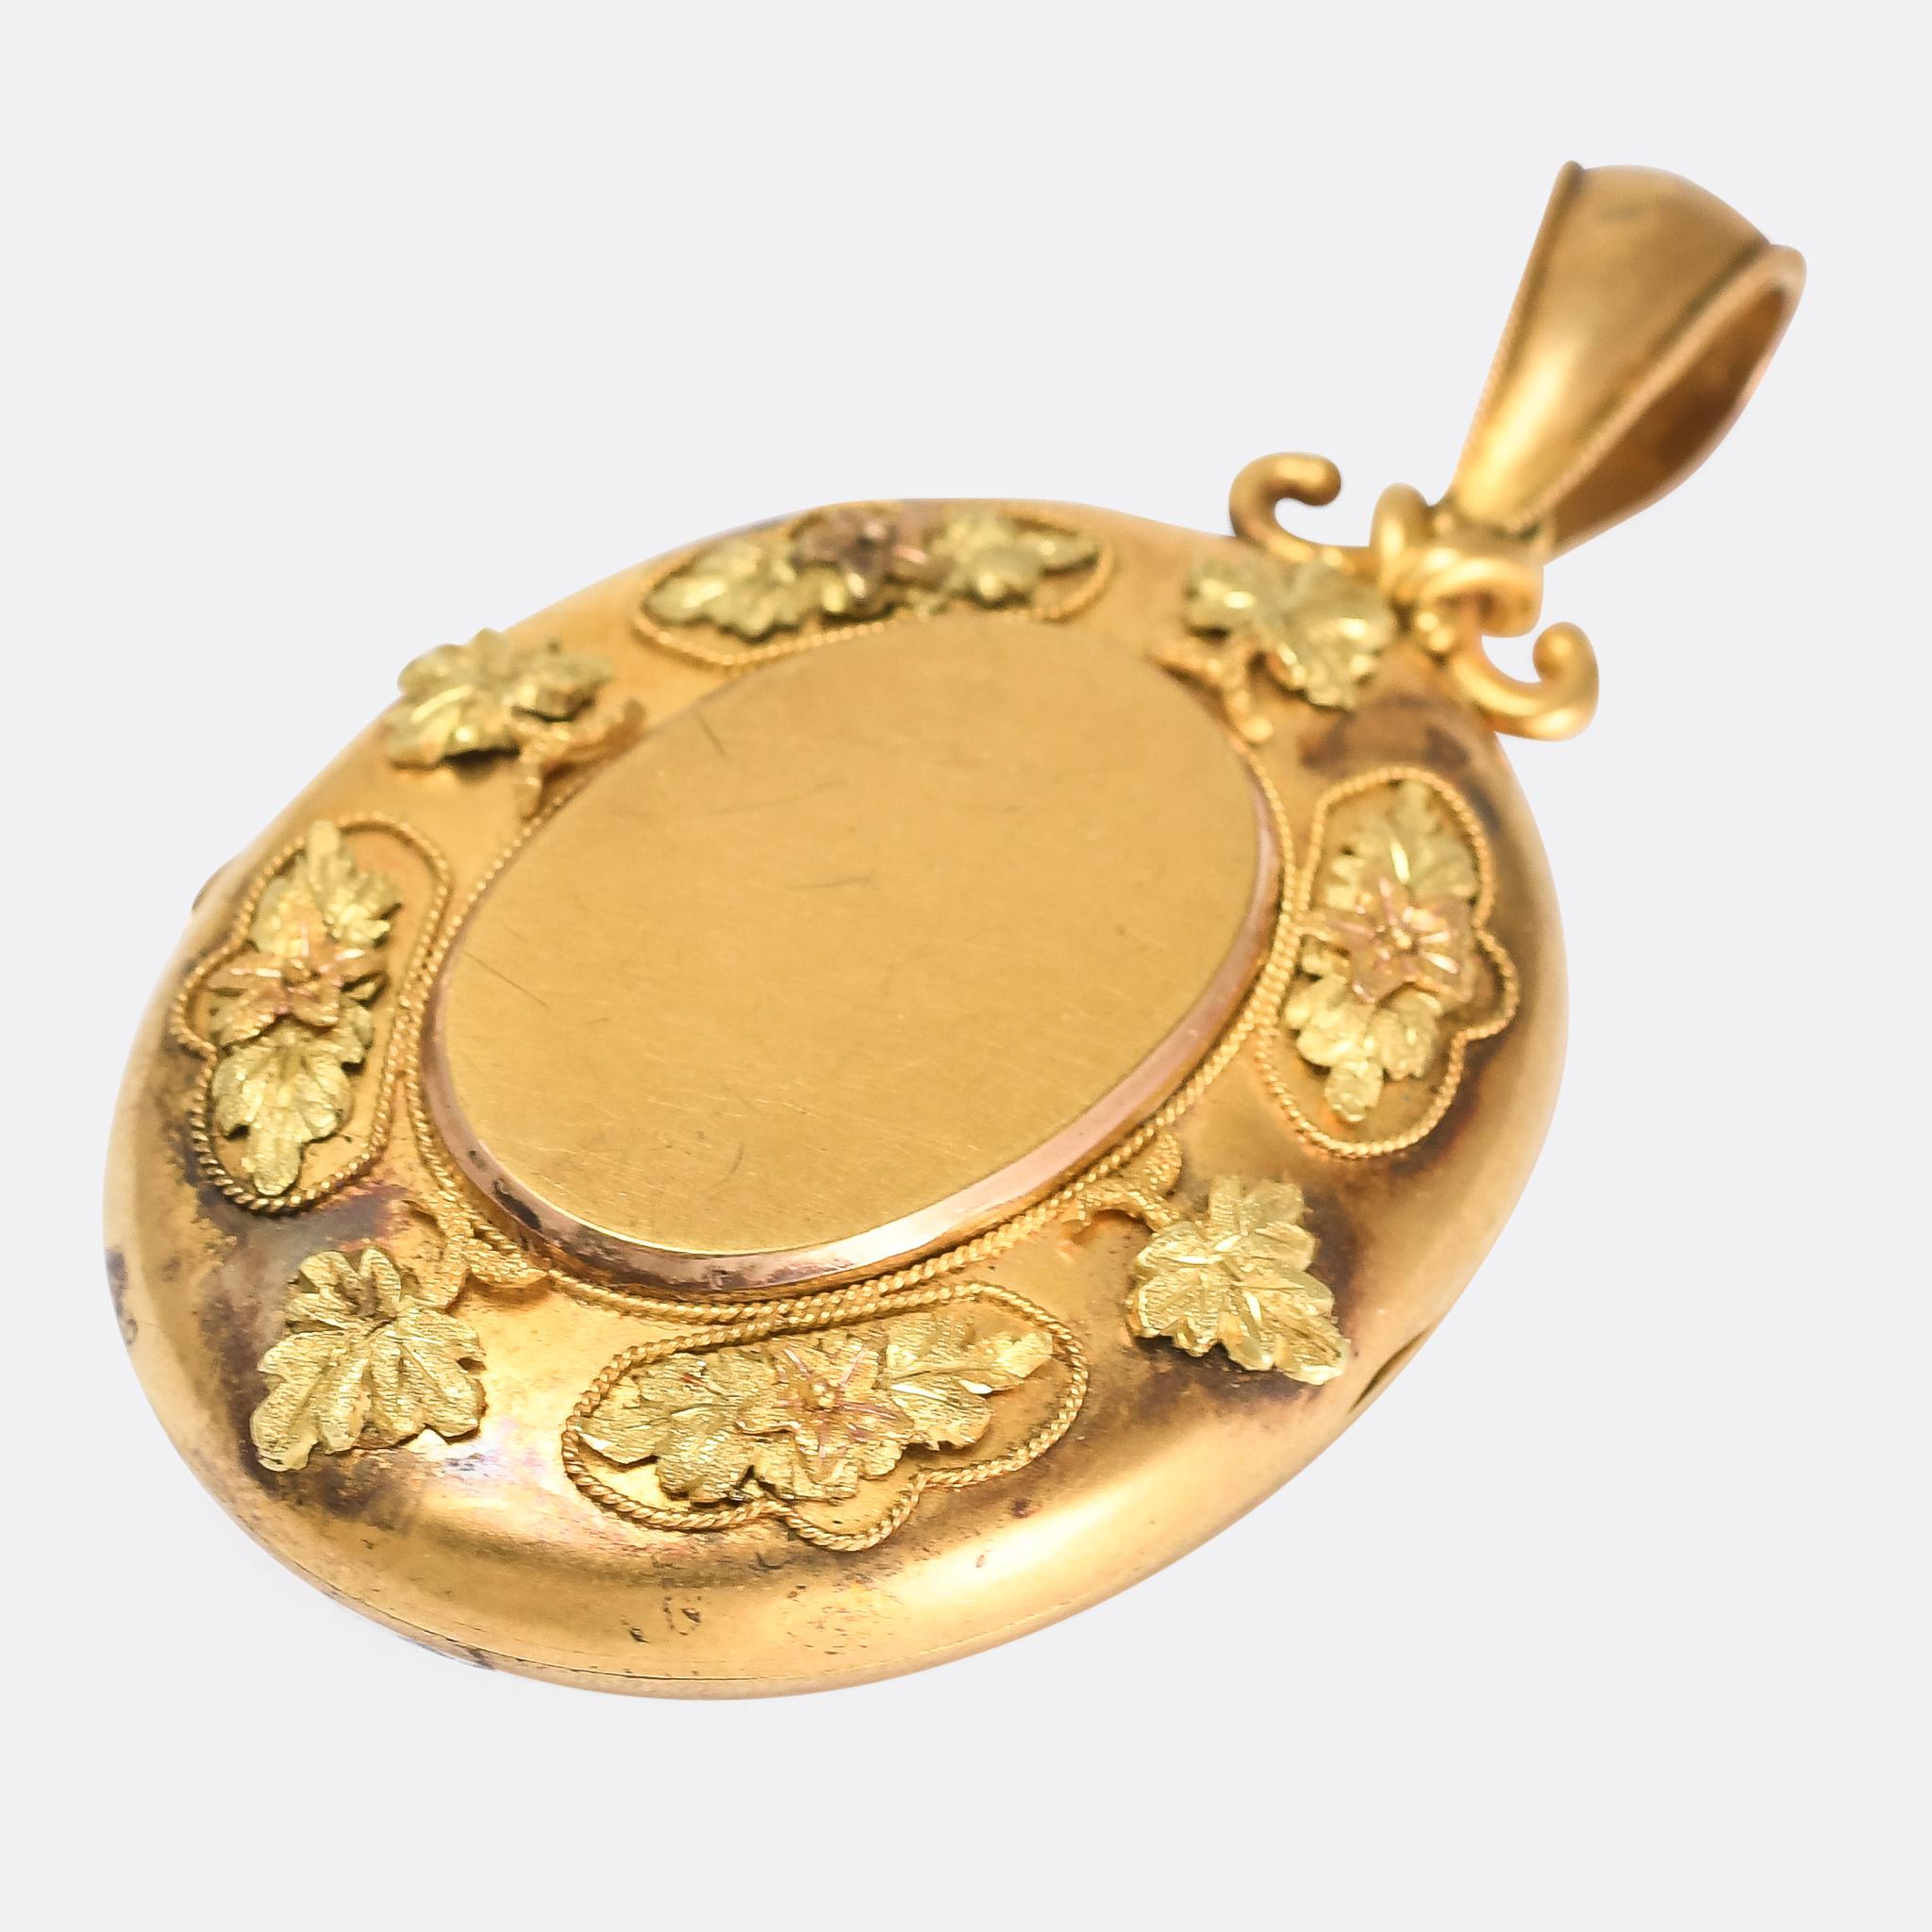 This gorgeous antique oval locket dates from the mid Victorian period, circa 1870. It's modelled in three-tone 18 karat gold, and features applied grape leaves and floral decoration, as well as ropework borders. Complete with the original bail, it's